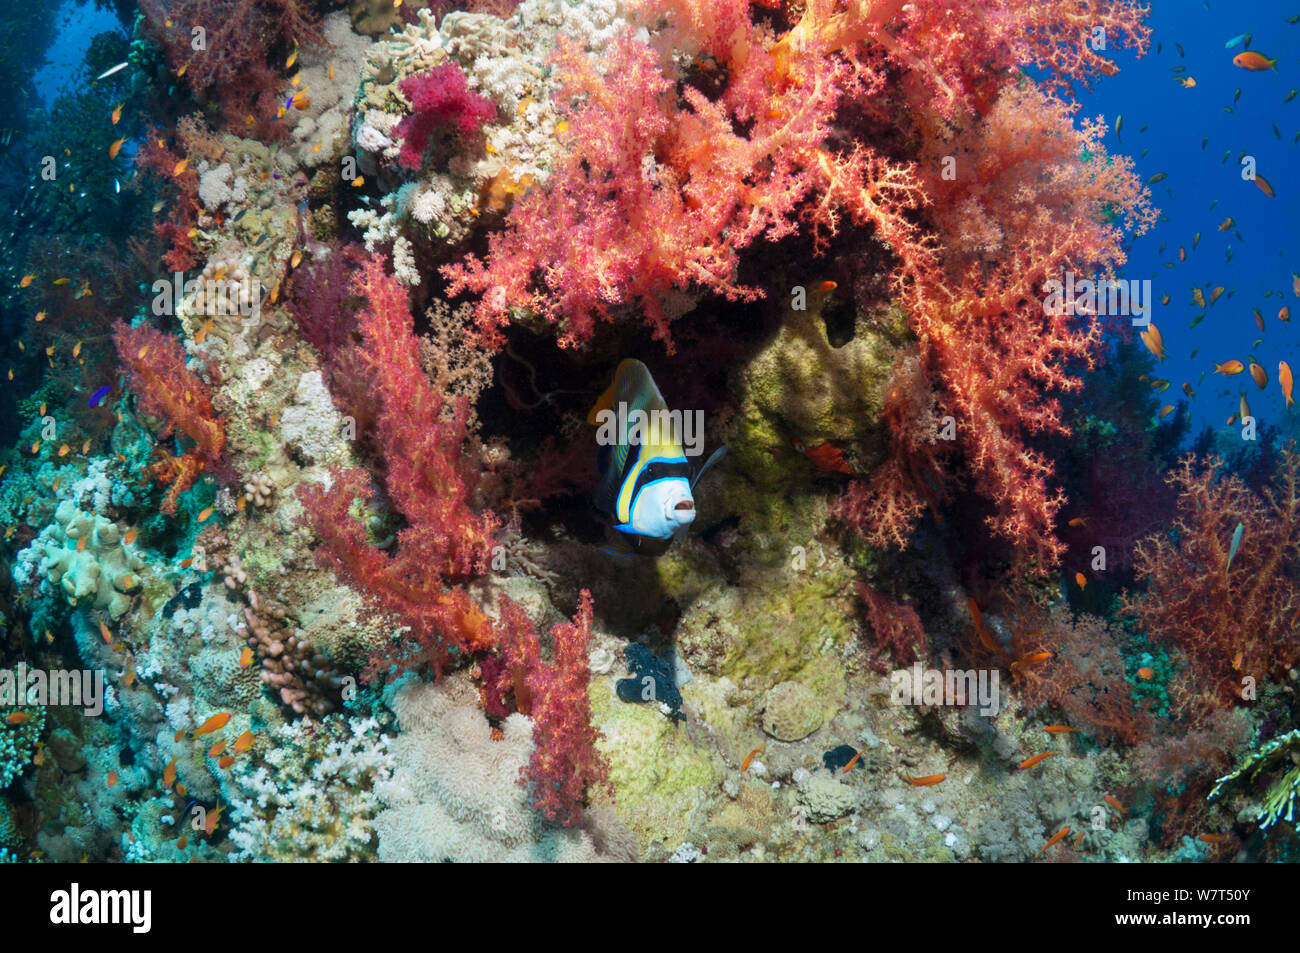 Coral reef scenery with an Emperor angelfish (Pomacanthus imperator) and soft corals. Egypt, Red Sea. Stock Photo